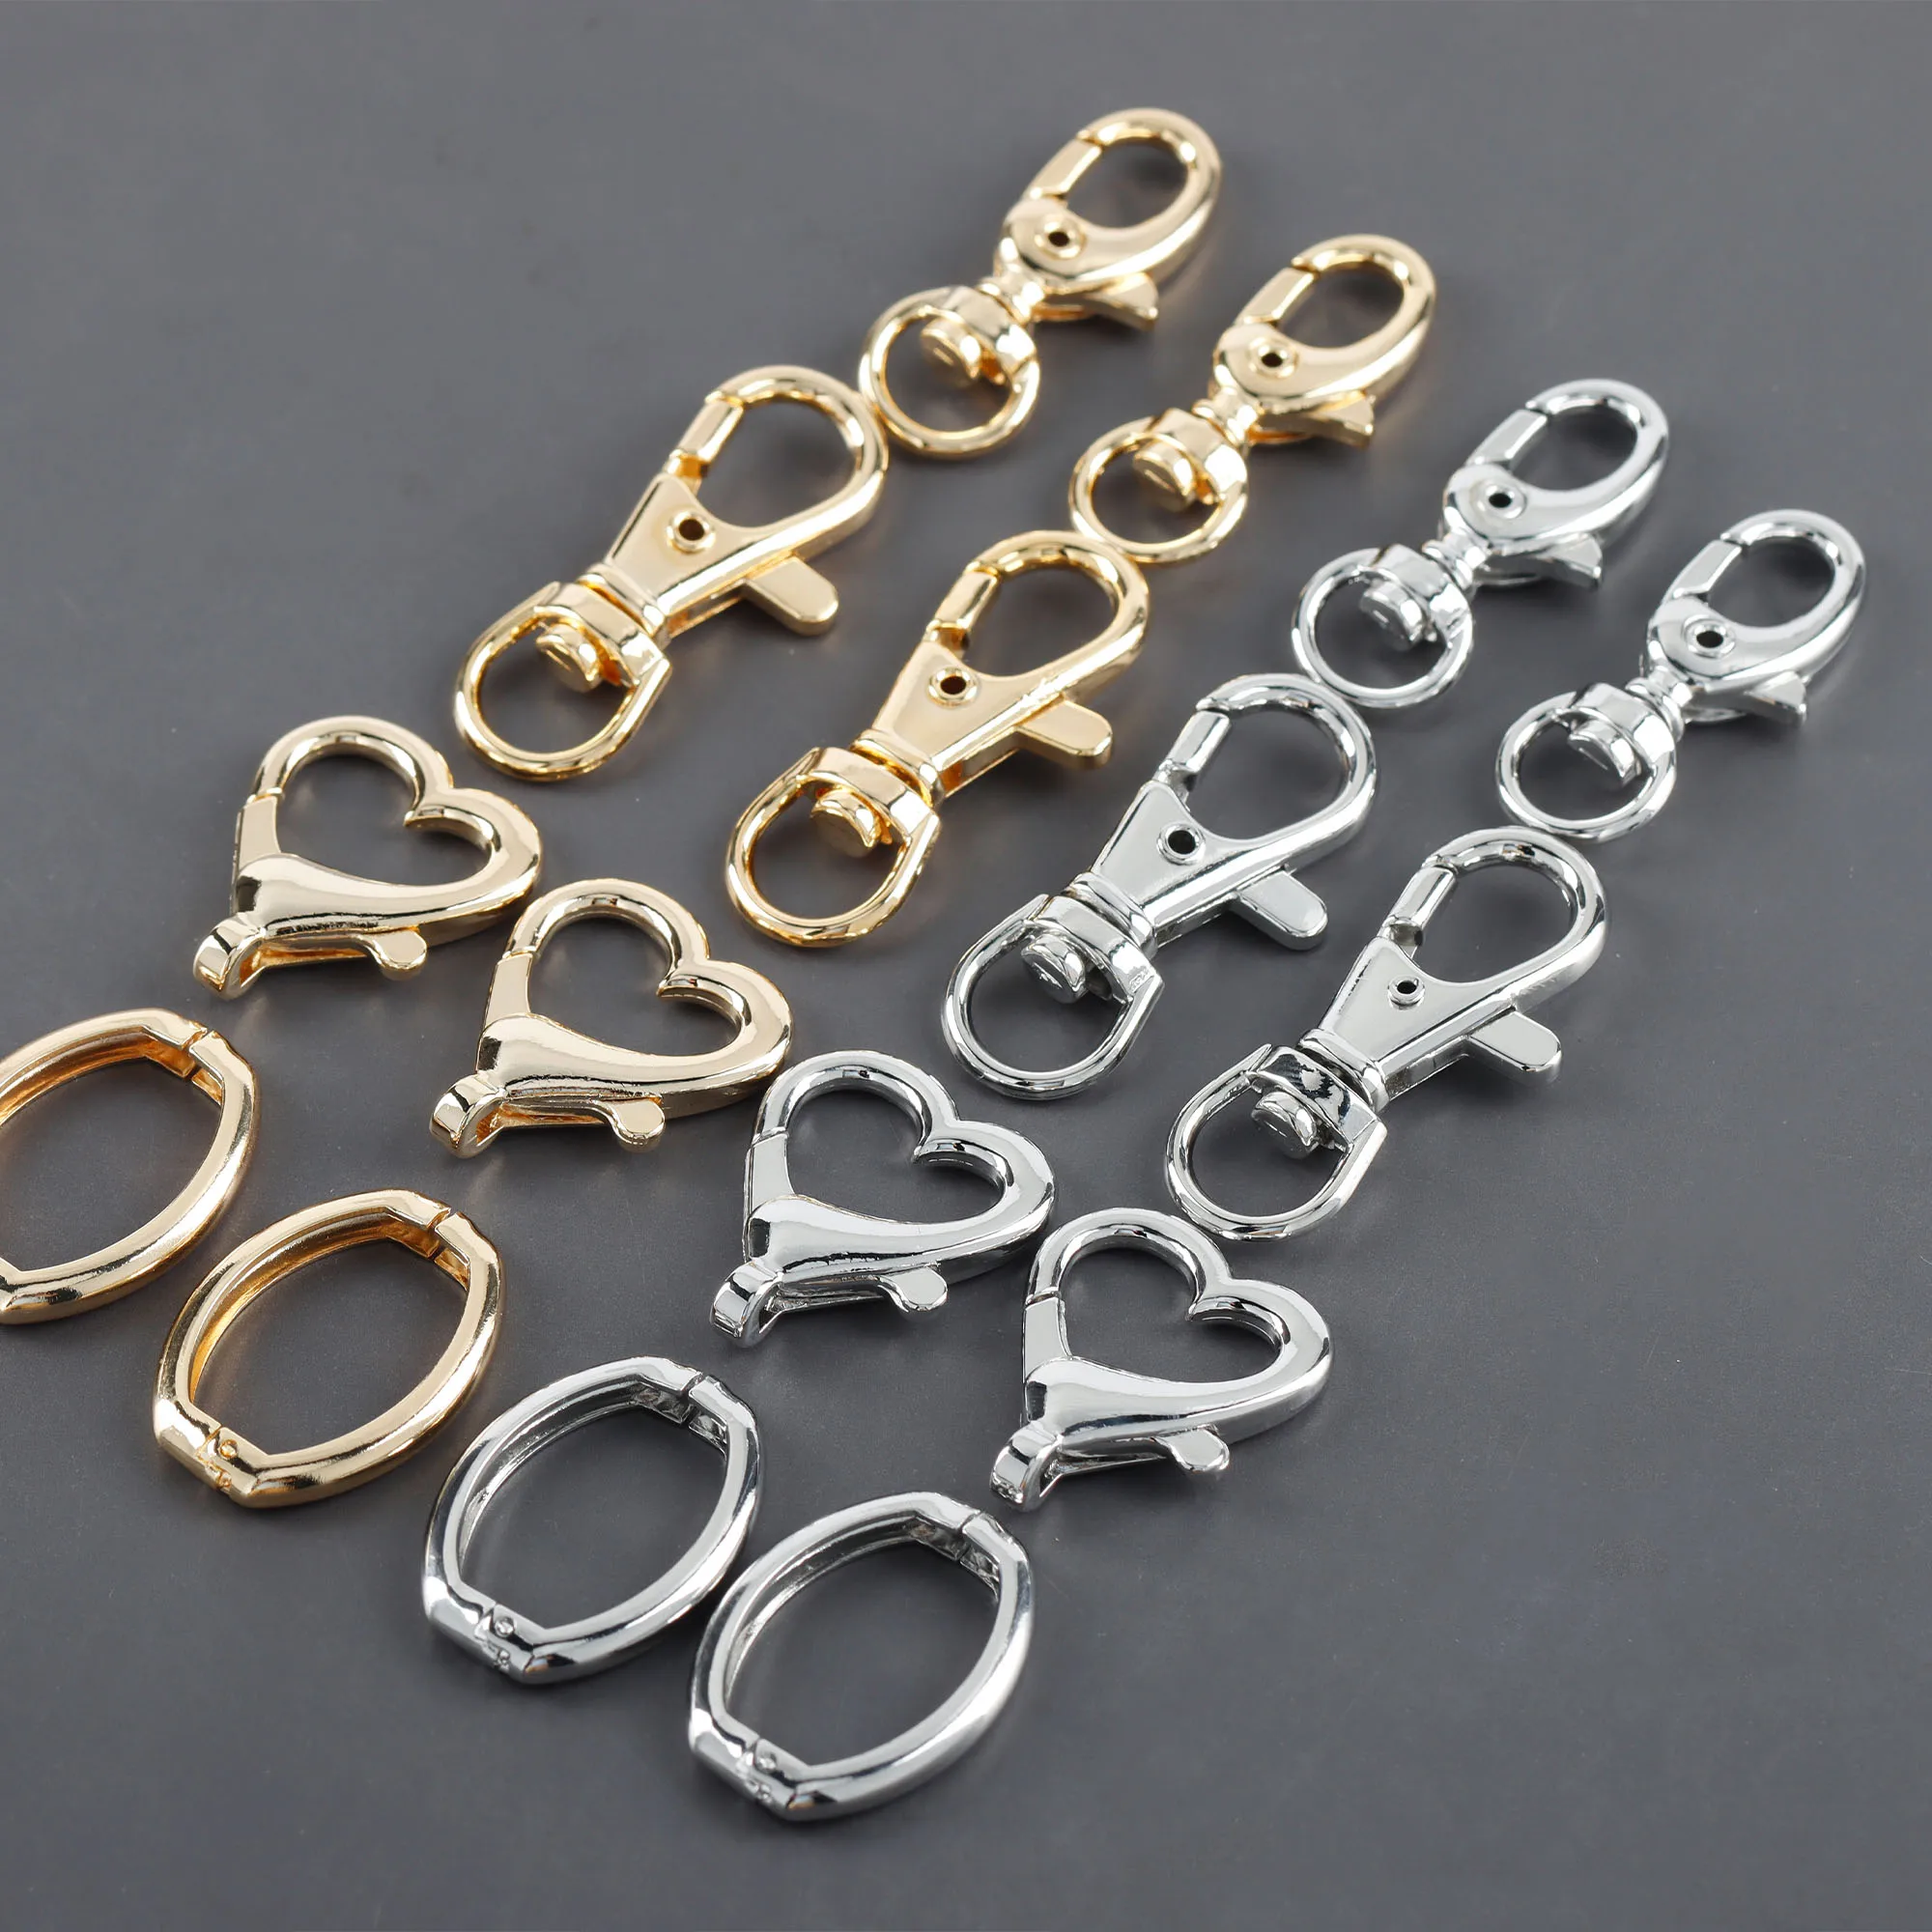 

Wholesale Metal Key Ring Lobster Clasp Diy Connection Accessories Jewelry Making M1064 10pcs/lot, Gold,silver